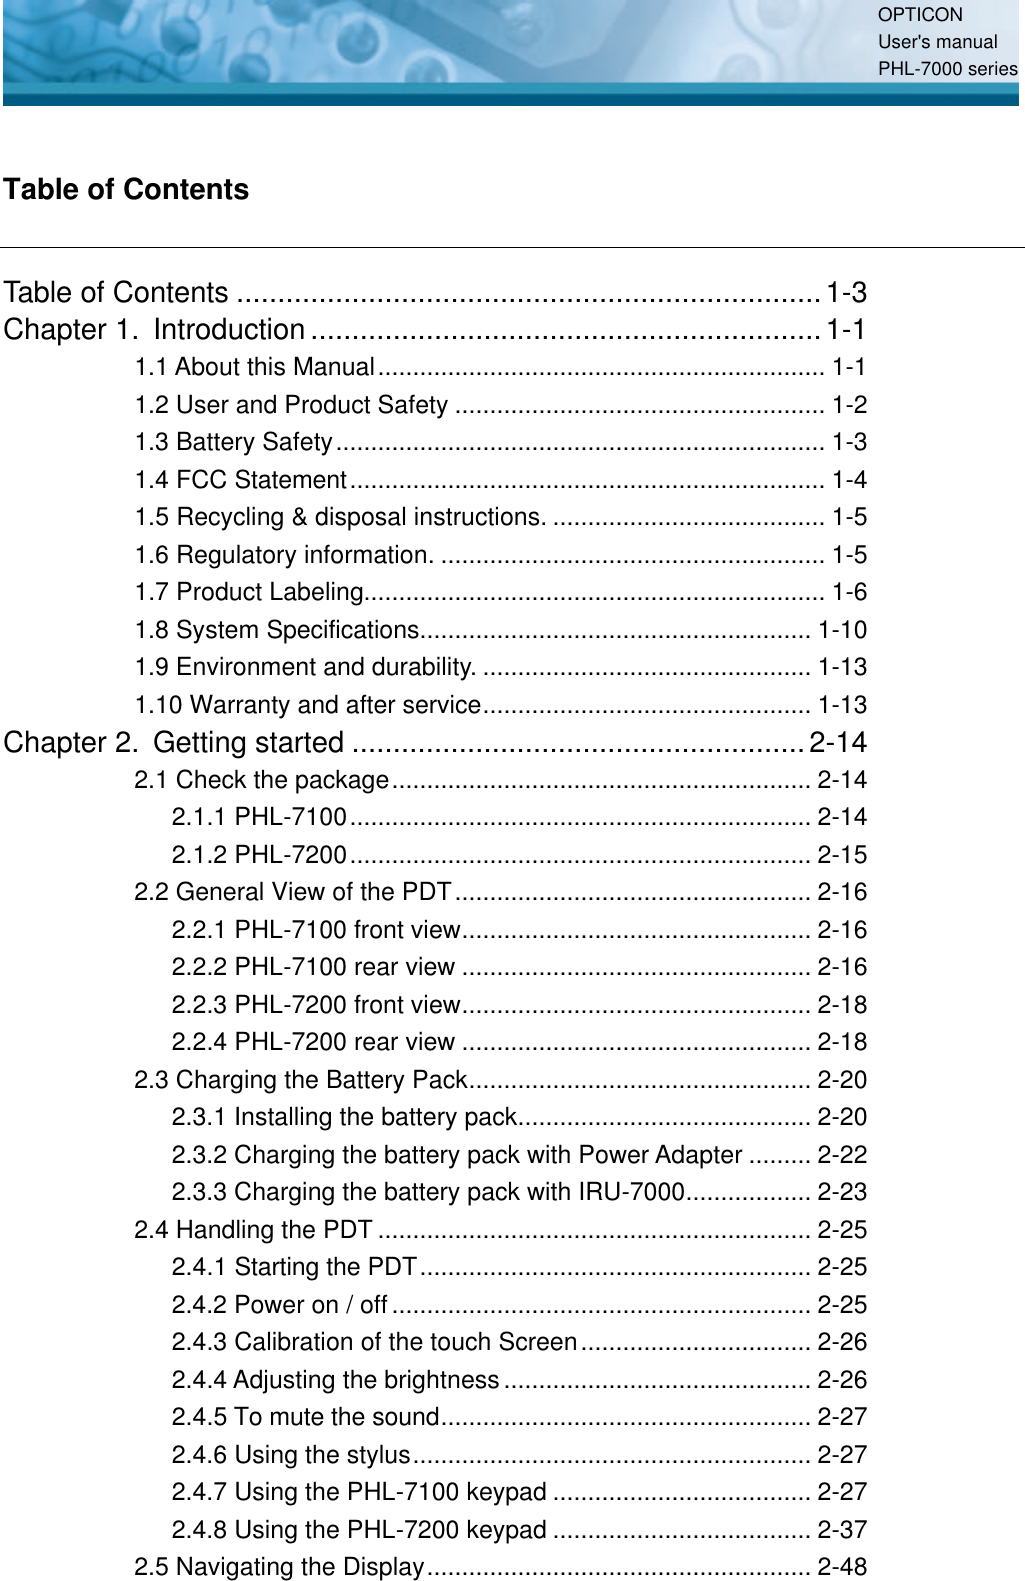 OPTICON User&apos;s manual PHL-7000 series   Table of Contents Table of Contents .......................................................................1-3 Chapter 1. Introduction ..............................................................1-1 1.1 About this Manual................................................................ 1-1 1.2 User and Product Safety ..................................................... 1-2 1.3 Battery Safety...................................................................... 1-3 1.4 FCC Statement.................................................................... 1-4 1.5 Recycling &amp; disposal instructions. ....................................... 1-5 1.6 Regulatory information. ....................................................... 1-5 1.7 Product Labeling.................................................................. 1-6 1.8 System Specifications........................................................ 1-10 1.9 Environment and durability. ............................................... 1-13 1.10 Warranty and after service............................................... 1-13 Chapter 2. Getting started .......................................................2-14 2.1 Check the package............................................................ 2-14 2.1.1 PHL-7100.................................................................. 2-14 2.1.2 PHL-7200.................................................................. 2-15 2.2 General View of the PDT................................................... 2-16 2.2.1 PHL-7100 front view.................................................. 2-16 2.2.2 PHL-7100 rear view .................................................. 2-16 2.2.3 PHL-7200 front view.................................................. 2-18 2.2.4 PHL-7200 rear view .................................................. 2-18 2.3 Charging the Battery Pack................................................. 2-20 2.3.1 Installing the battery pack.......................................... 2-20 2.3.2 Charging the battery pack with Power Adapter ......... 2-22 2.3.3 Charging the battery pack with IRU-7000.................. 2-23 2.4 Handling the PDT .............................................................. 2-25 2.4.1 Starting the PDT........................................................ 2-25 2.4.2 Power on / off............................................................ 2-25 2.4.3 Calibration of the touch Screen................................. 2-26 2.4.4 Adjusting the brightness............................................ 2-26 2.4.5 To mute the sound..................................................... 2-27 2.4.6 Using the stylus......................................................... 2-27 2.4.7 Using the PHL-7100 keypad ..................................... 2-27 2.4.8 Using the PHL-7200 keypad ..................................... 2-37 2.5 Navigating the Display....................................................... 2-48 